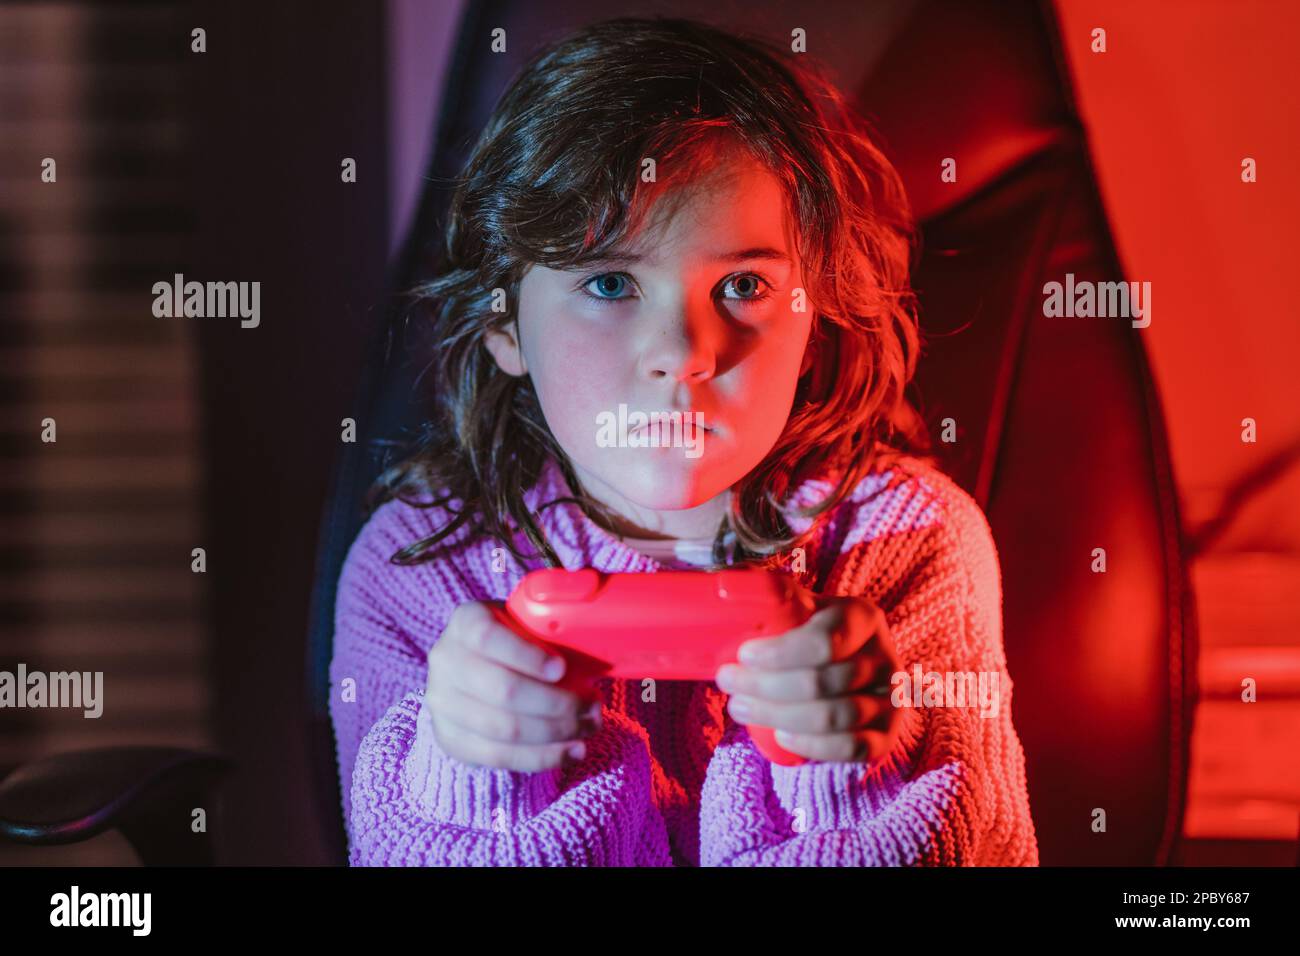 Cute attentive little girl with long brown hair in warm sweater using gamepad while playing videogame sitting on black leather chair in dark room with Stock Photo